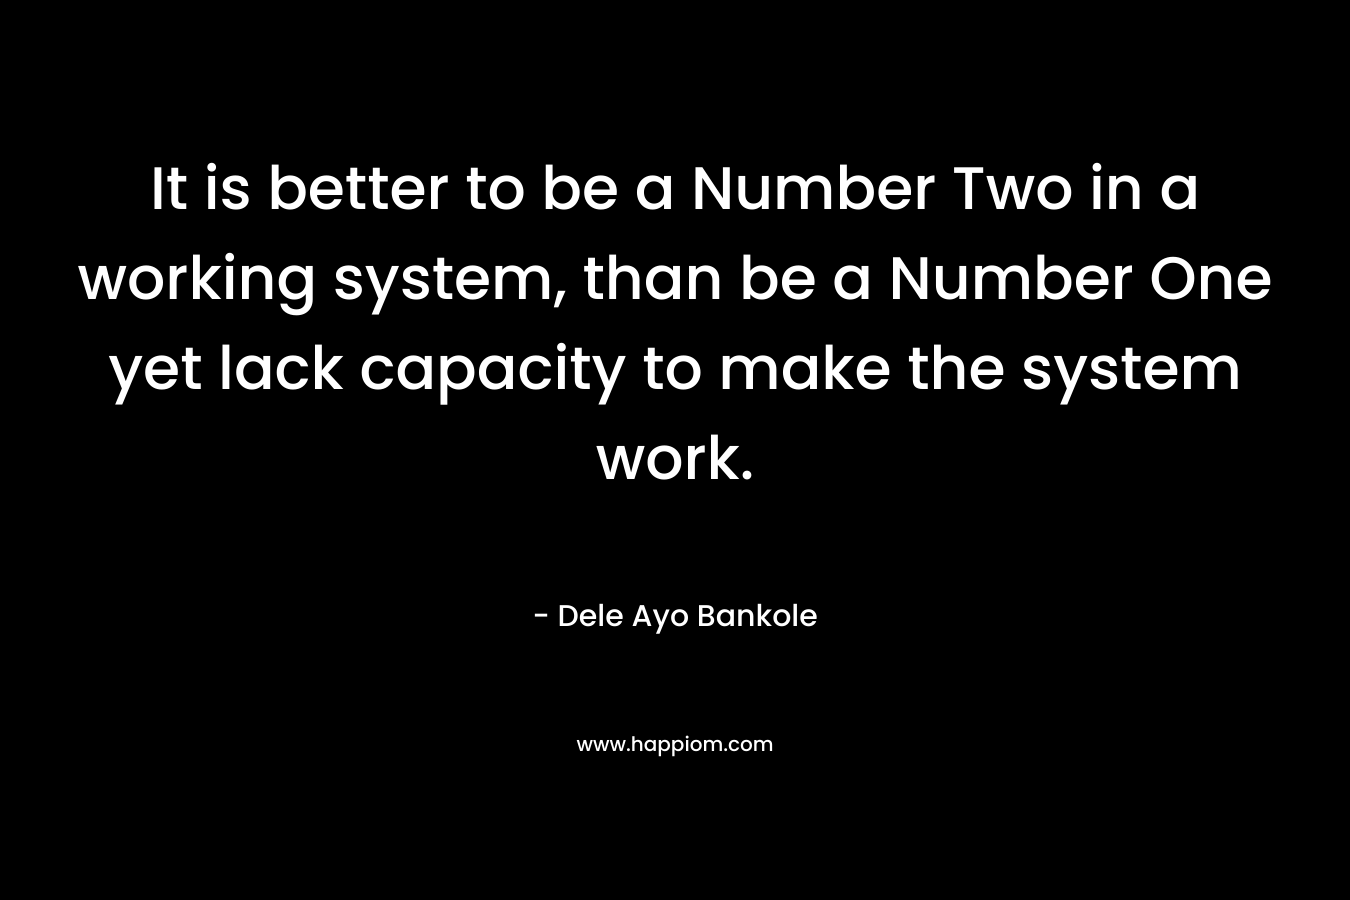 It is better to be a Number Two in a working system, than be a Number One yet lack capacity to make the system work.